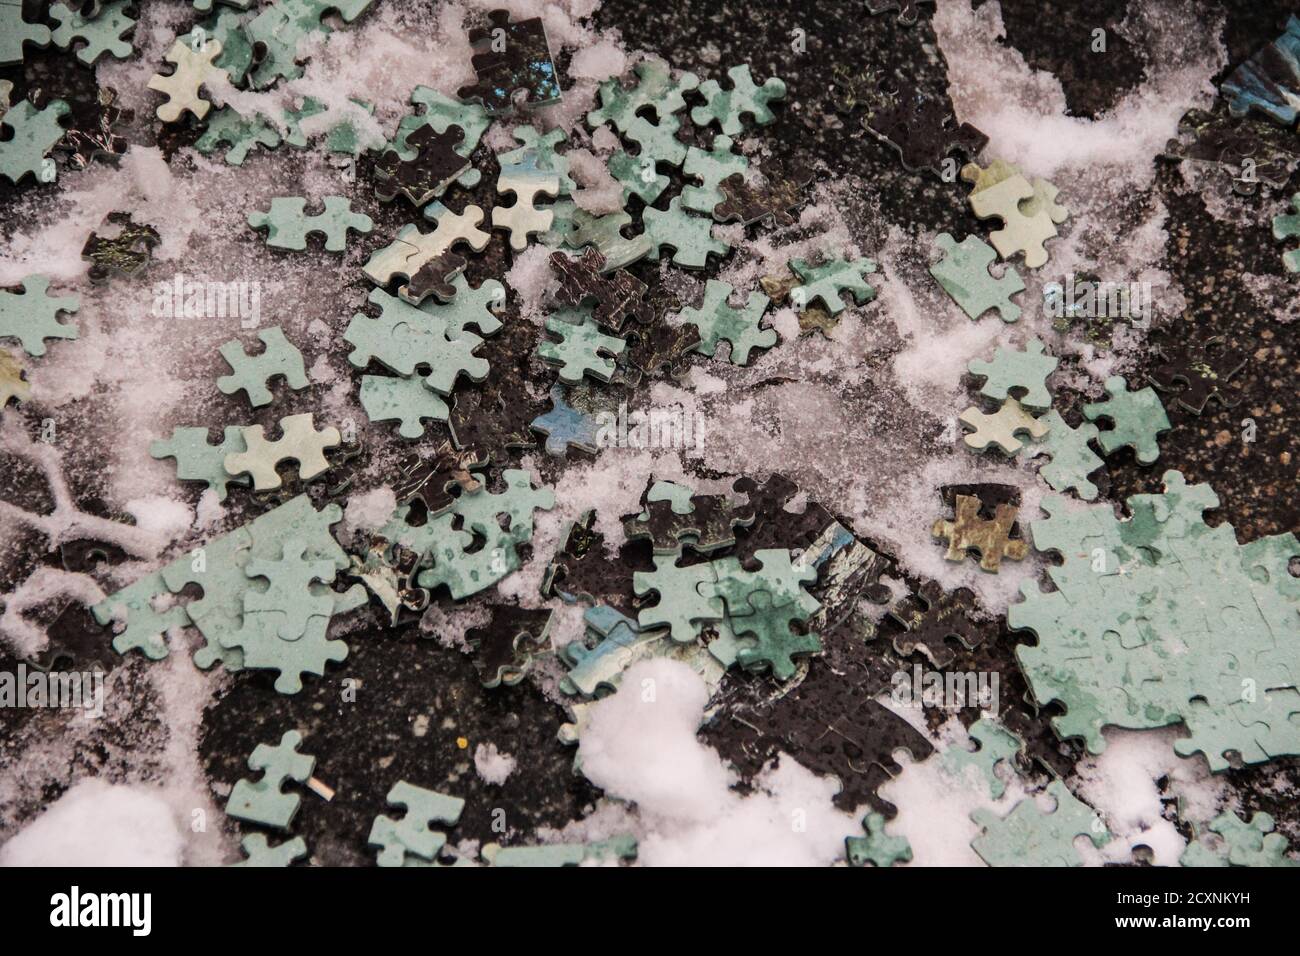 black and green puzzle spread in a snow landscape during wintertimes Stock Photo